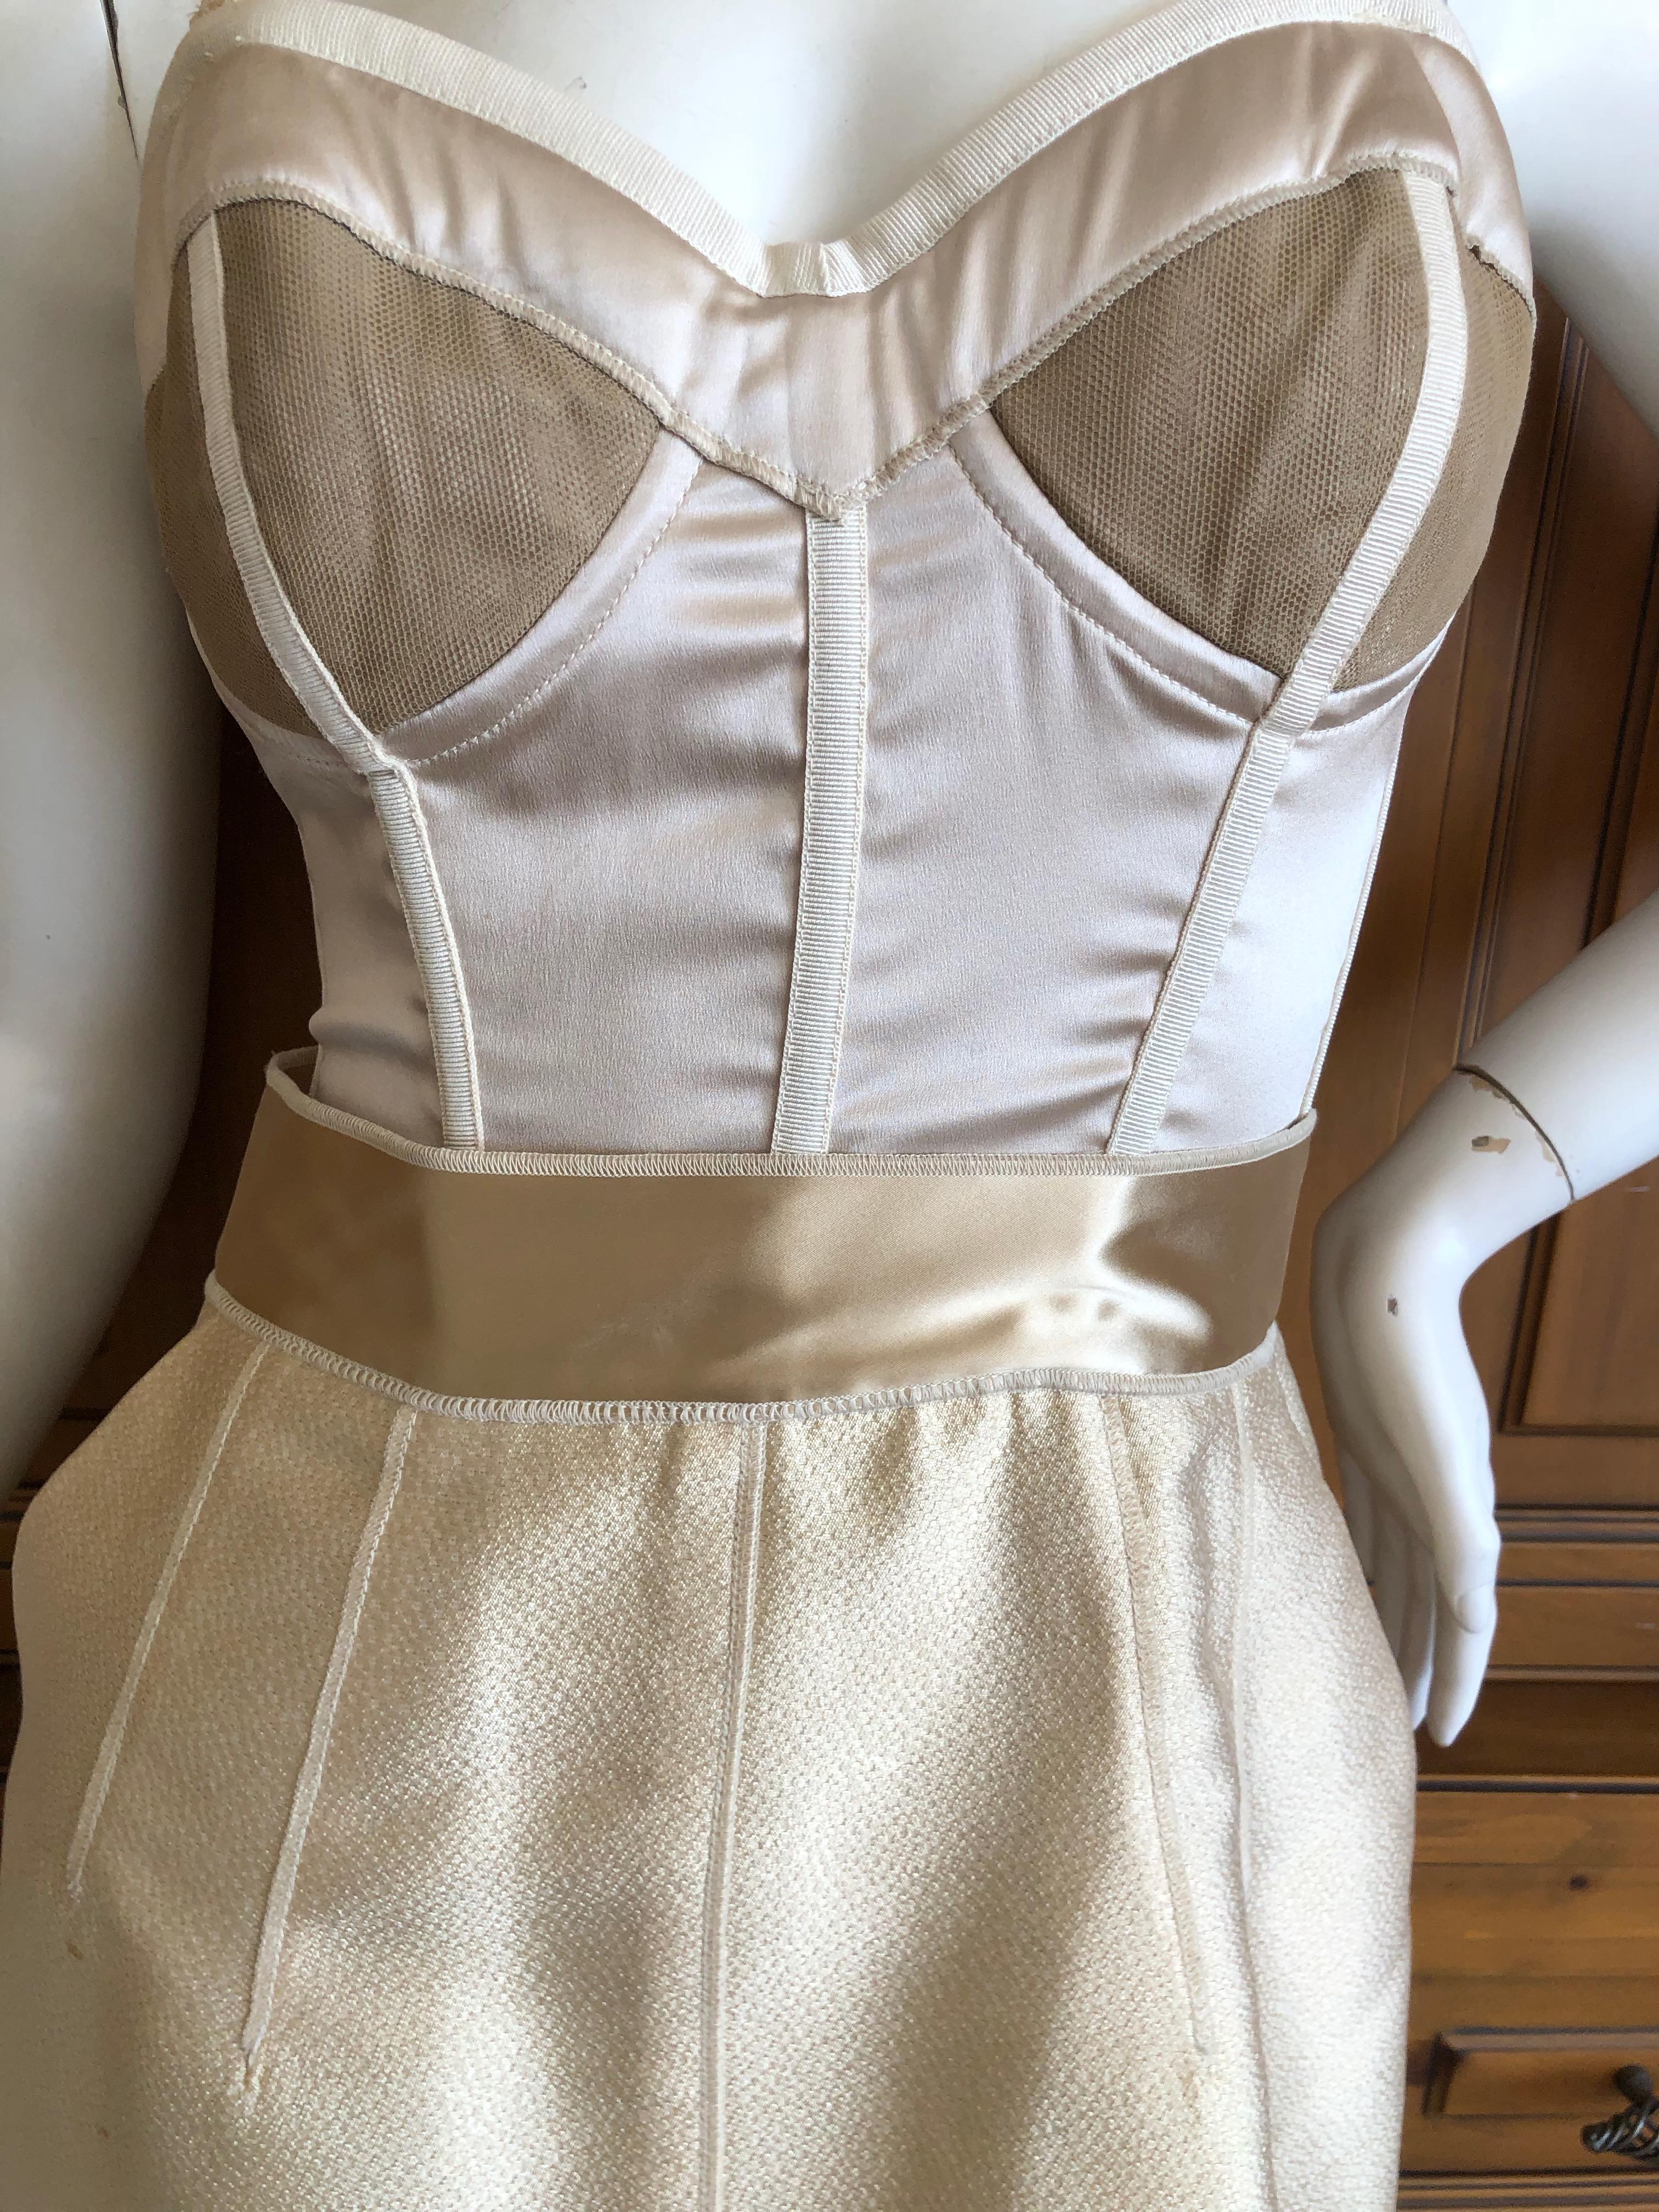 Dolce & Gabbana Sexy Vintage Golden Corset Cocktail Dress In Excellent Condition For Sale In Cloverdale, CA